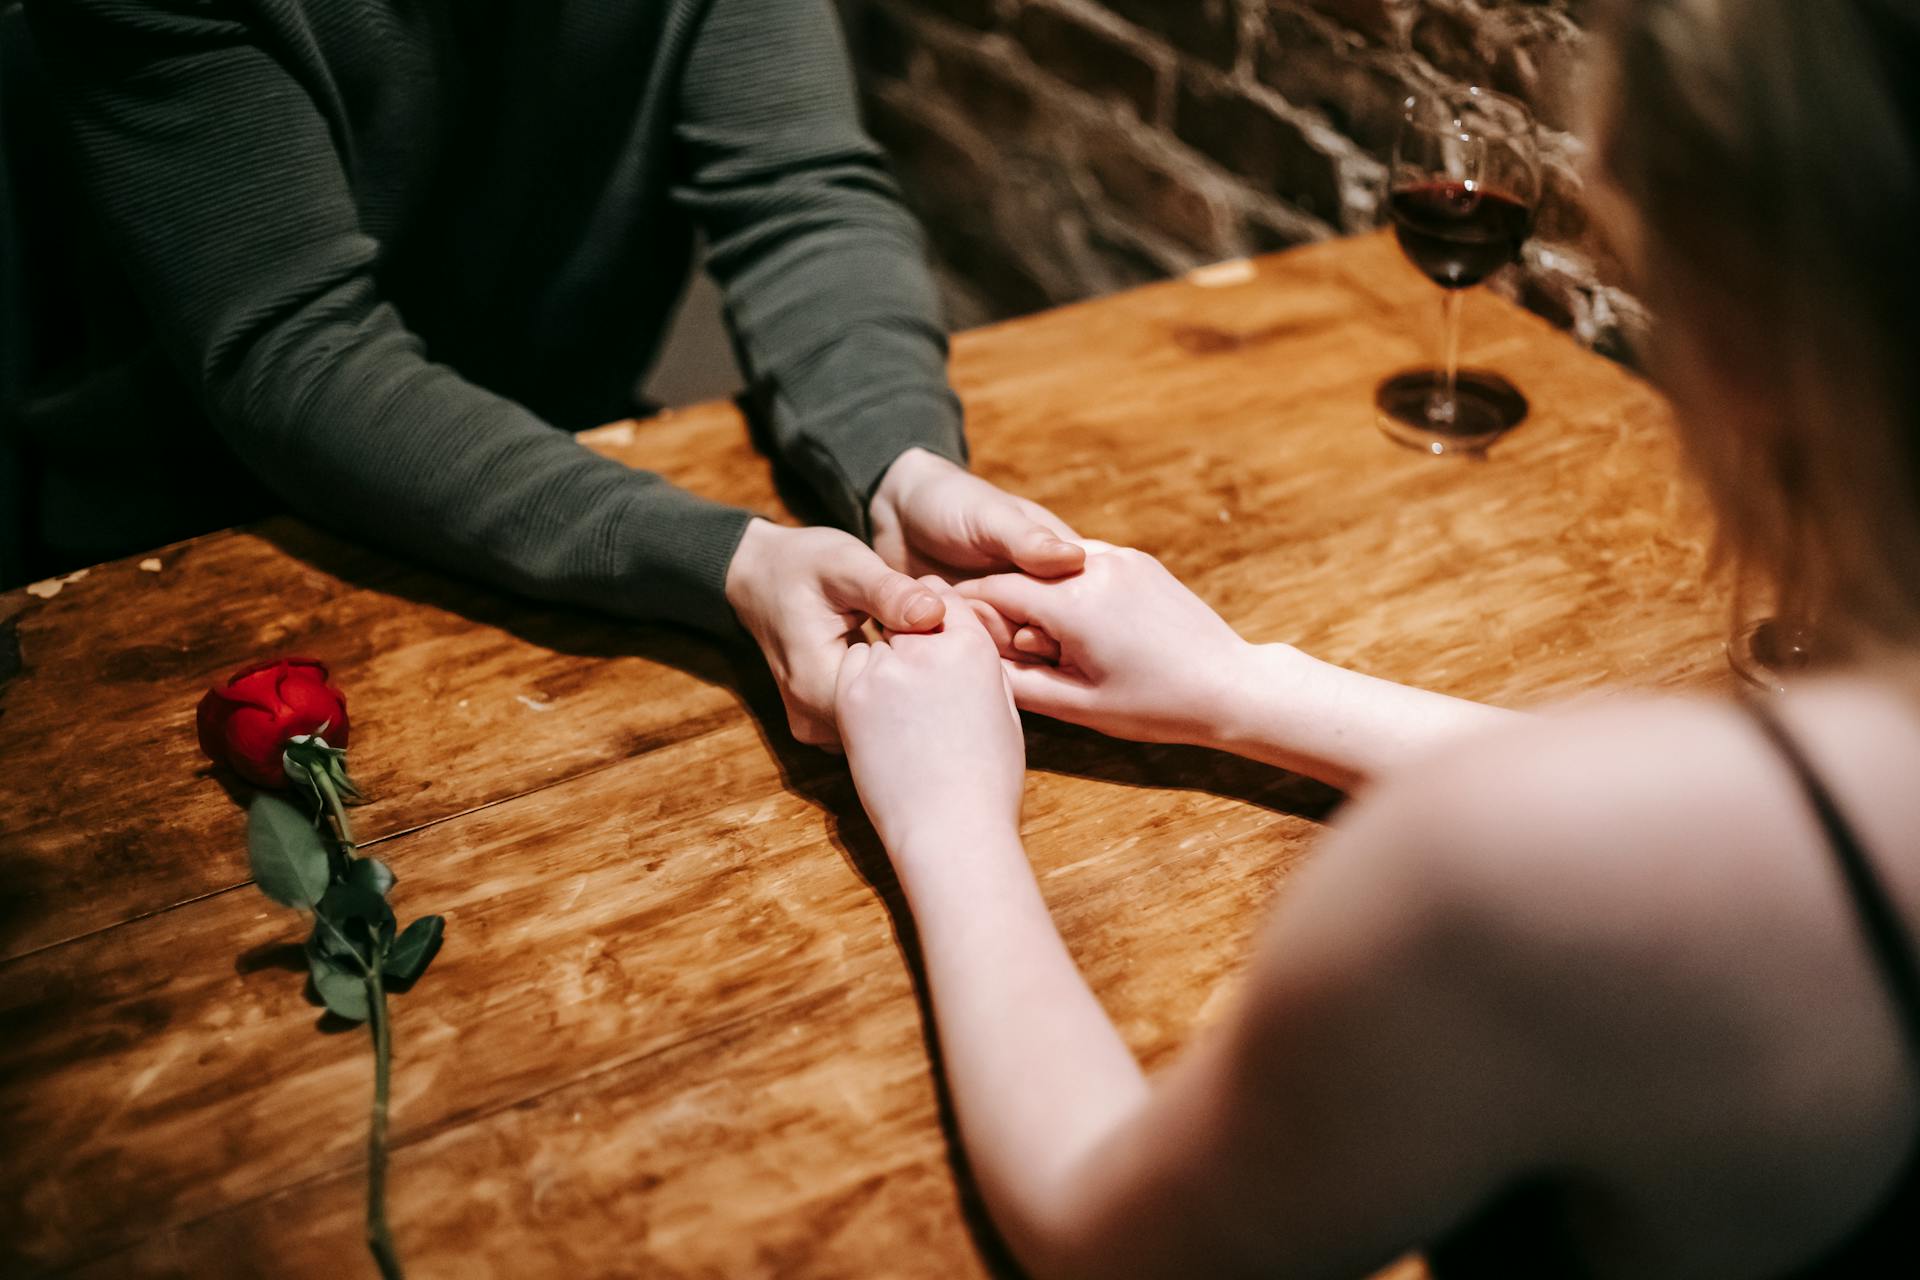 Couple on a date holding hands | Source: Pexels